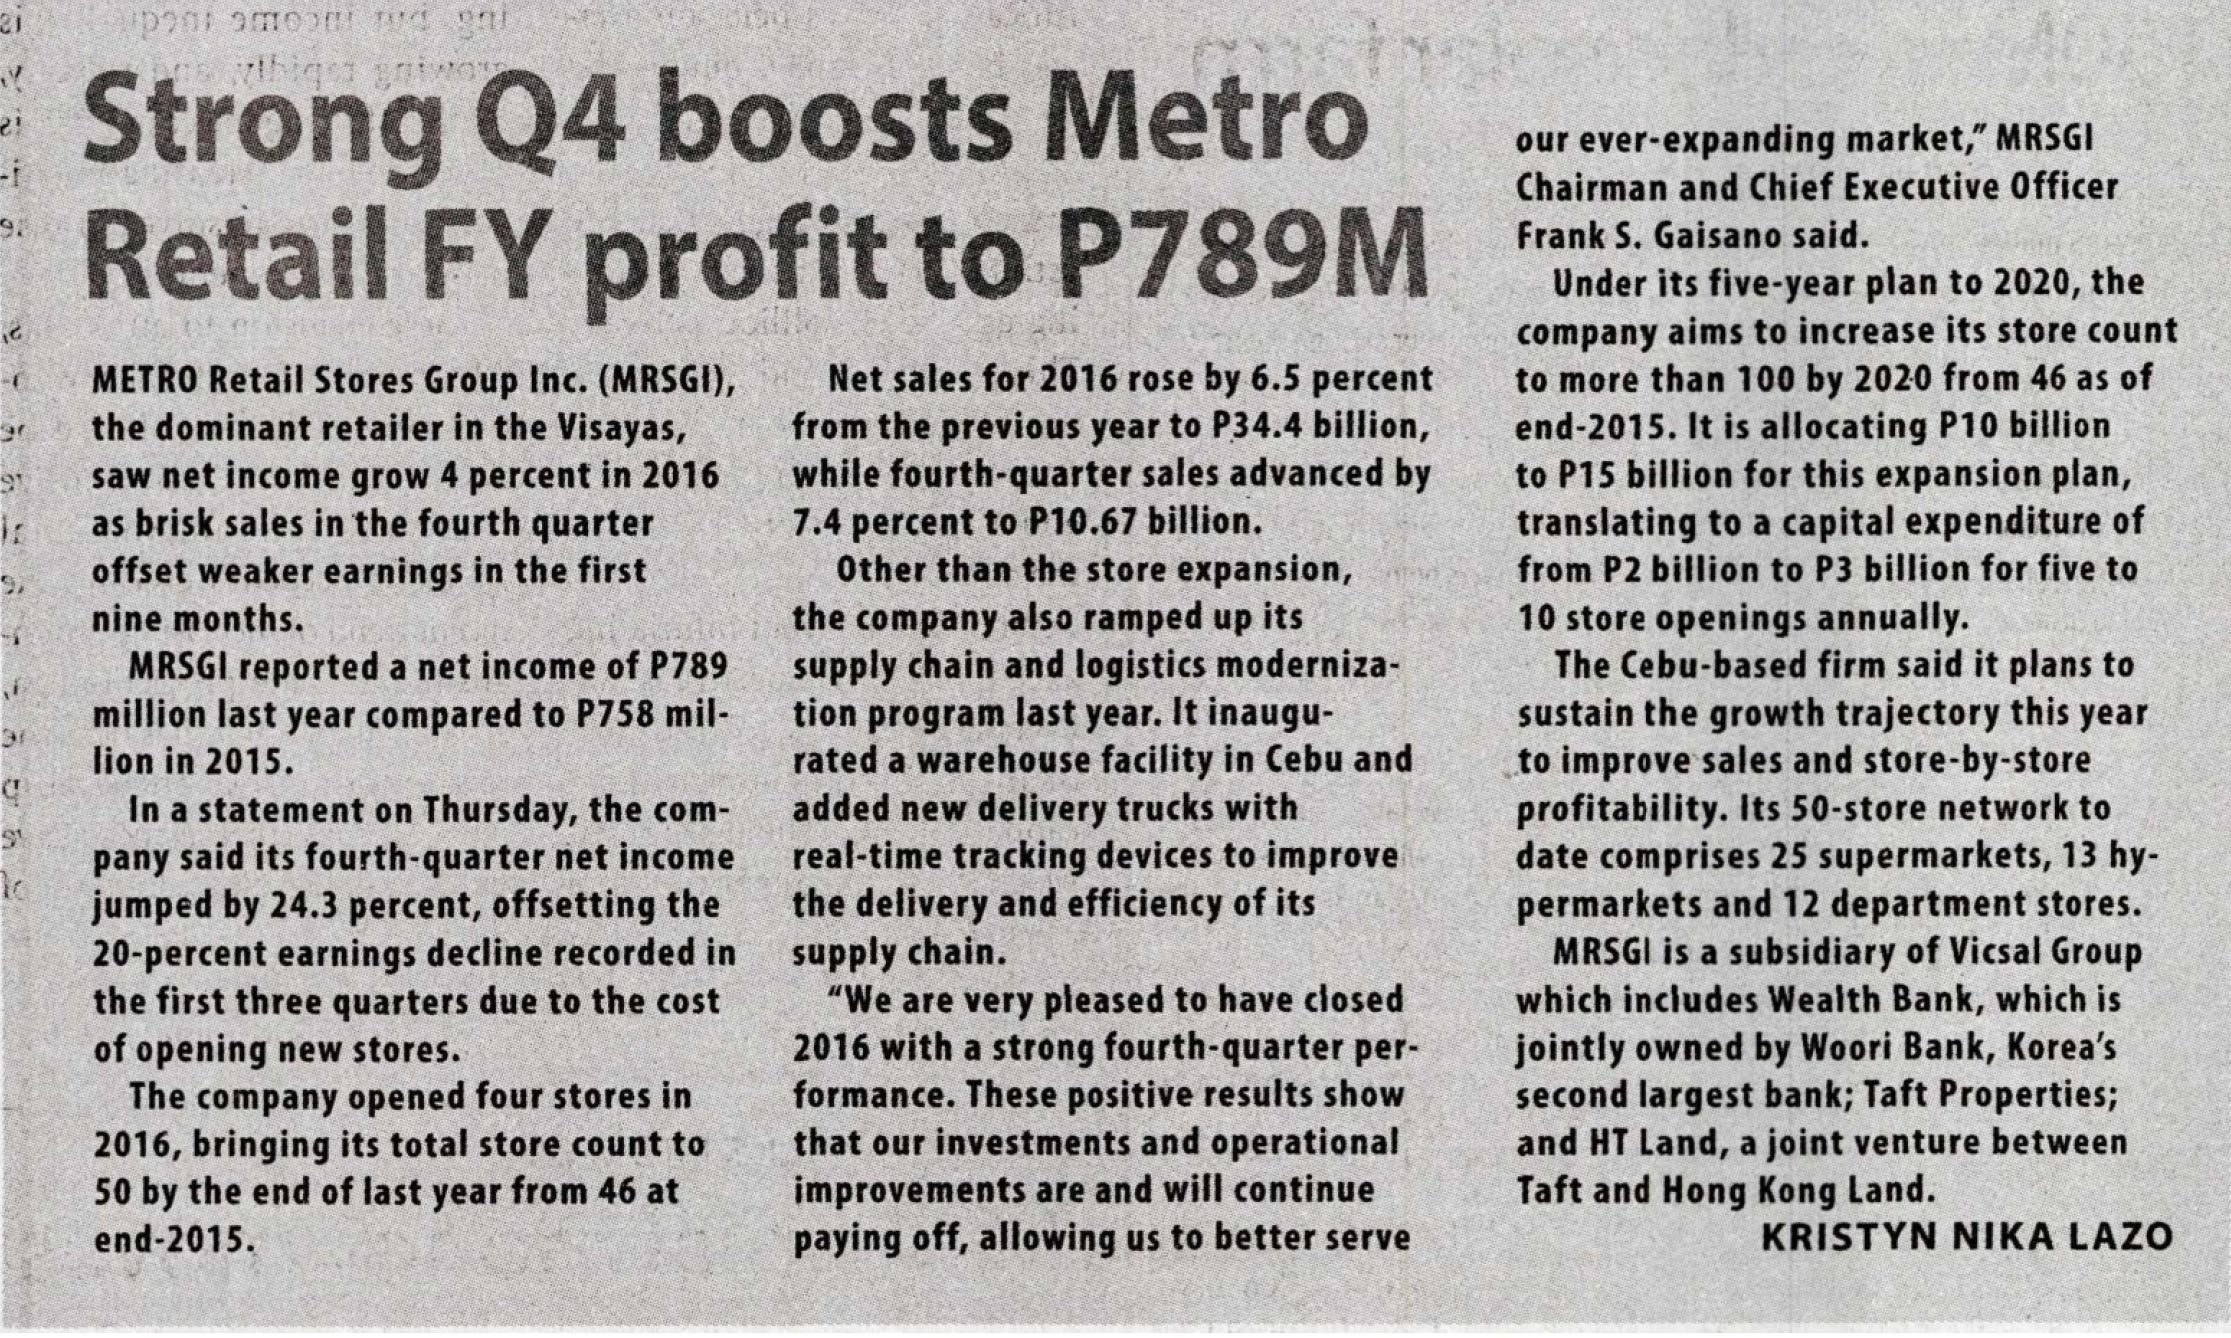 Strong Q4 boosts Metro FY profit to P789M